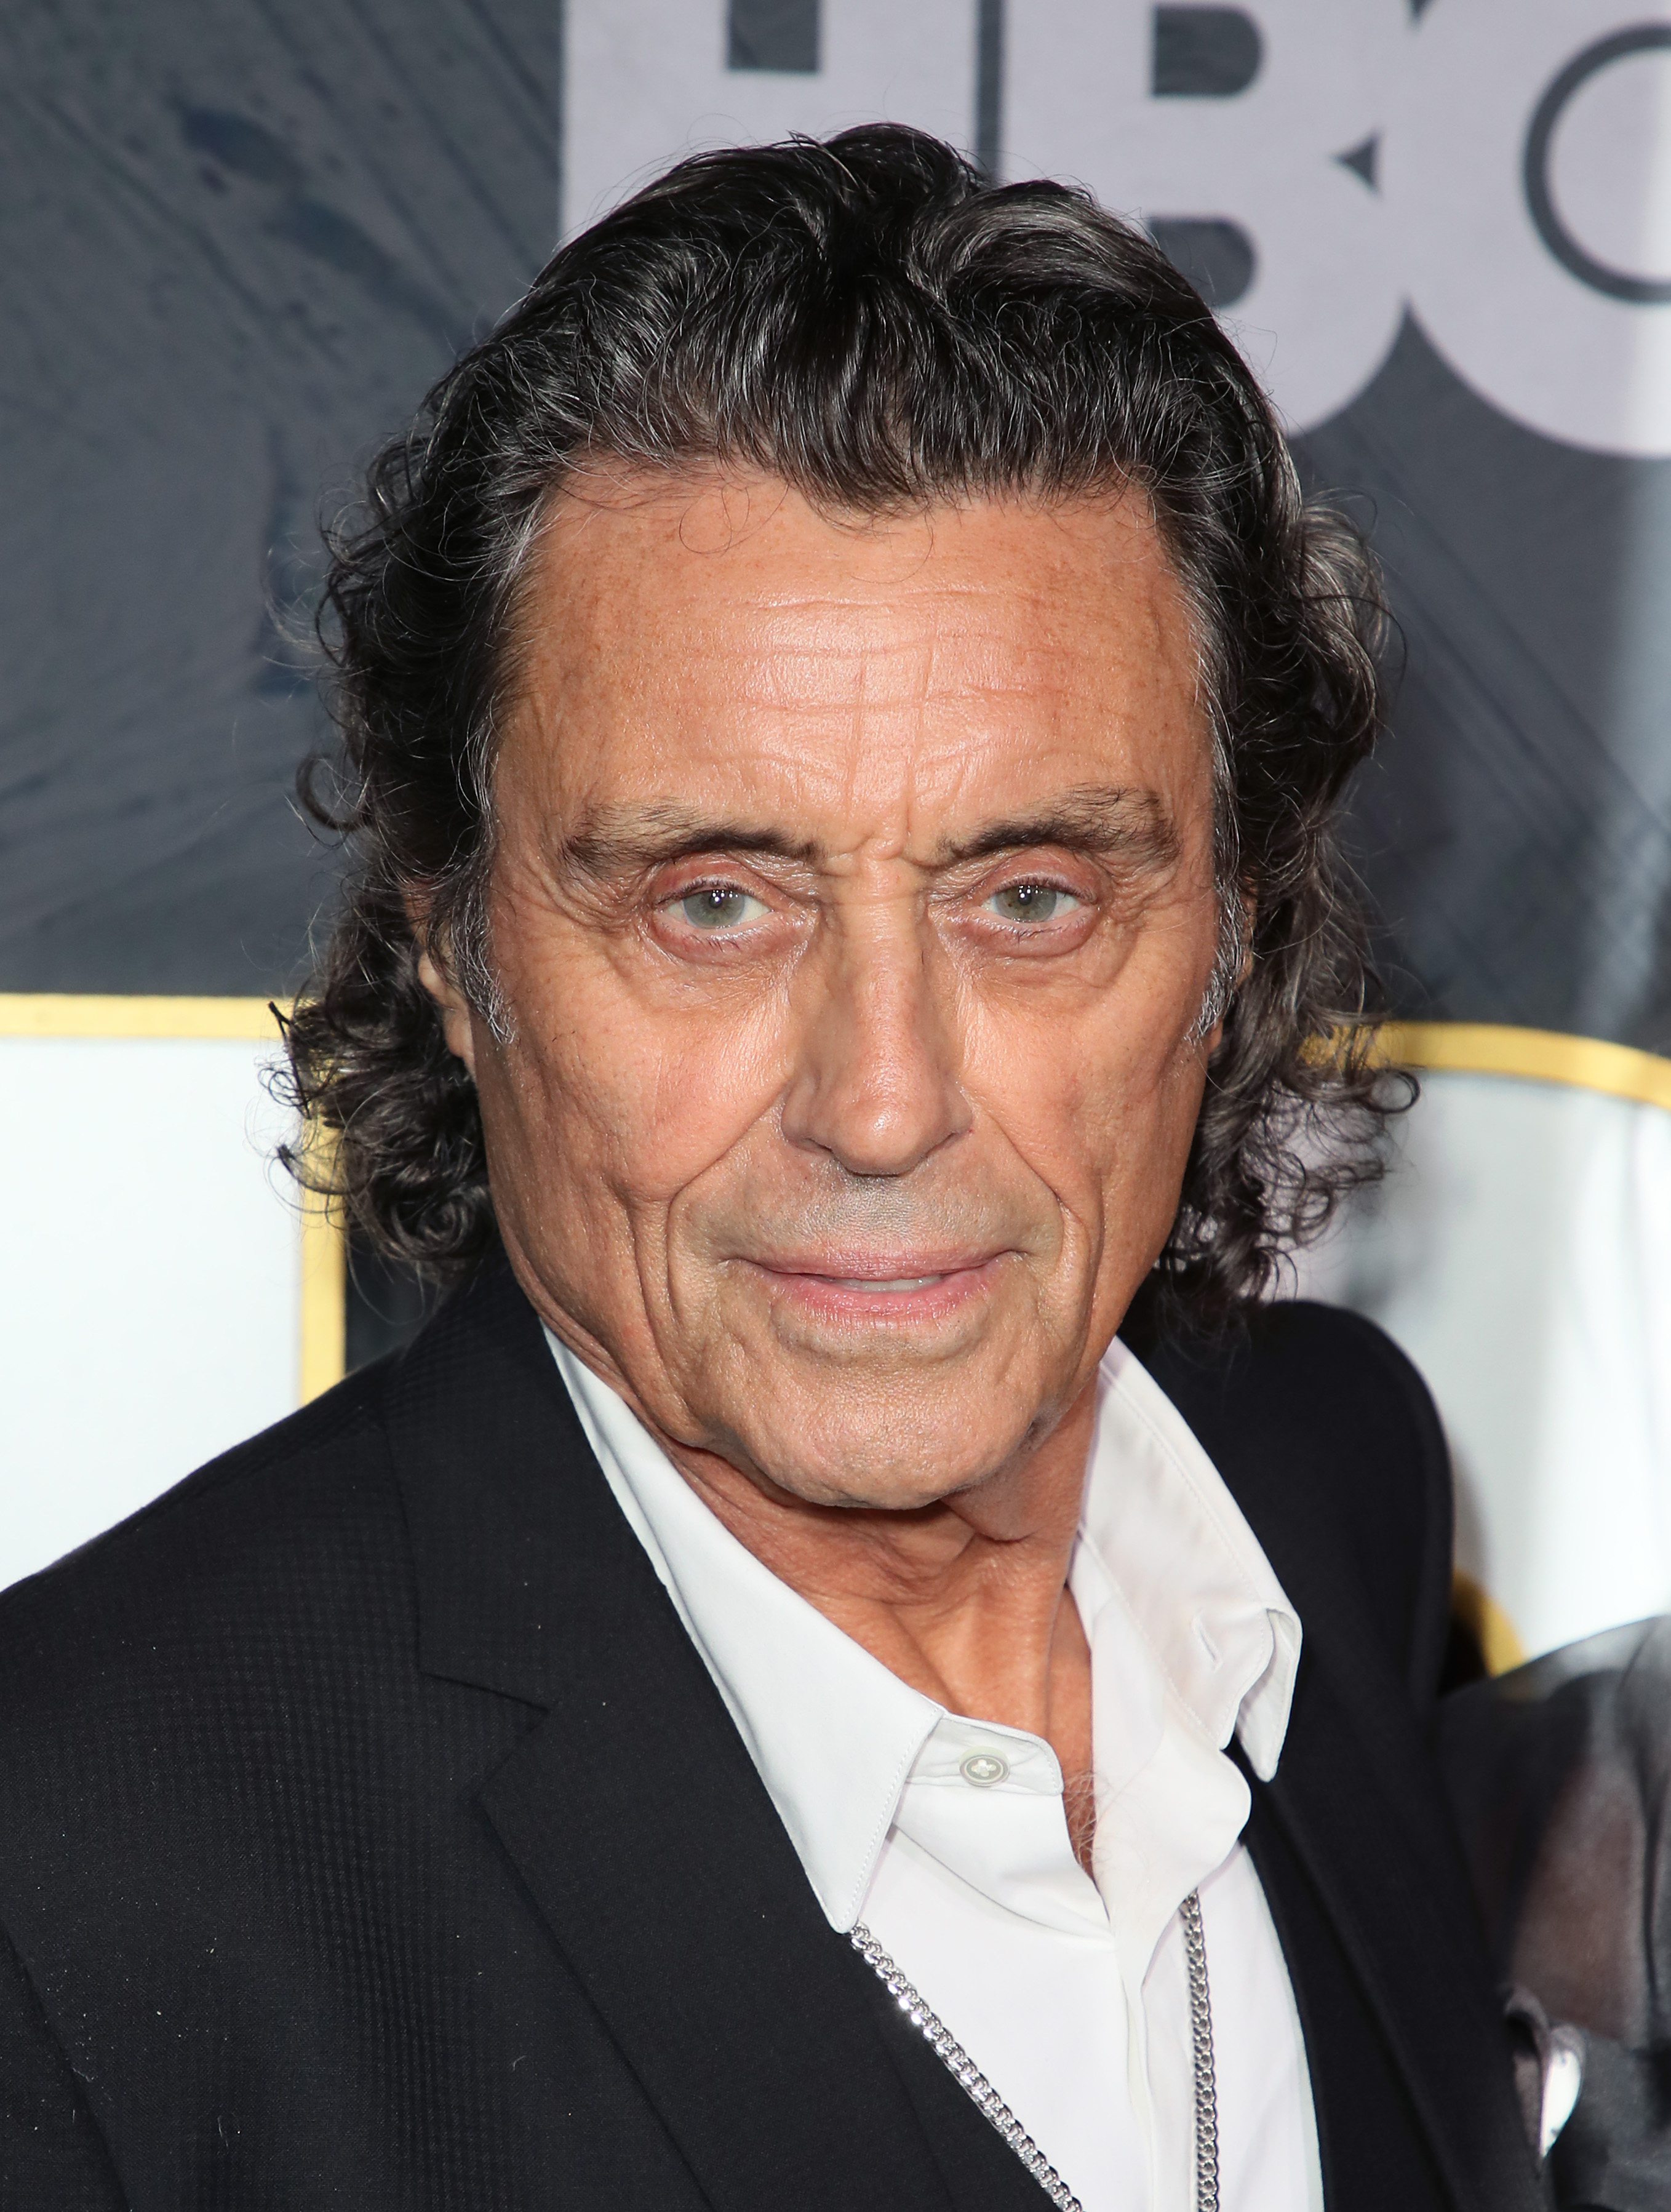 Ian McShane attends the HBO's Post Emmy Awards Reception at The Plaza at the Pacific Design Center on September 22, 2019 in Los Angeles, California | Source: Getty Images